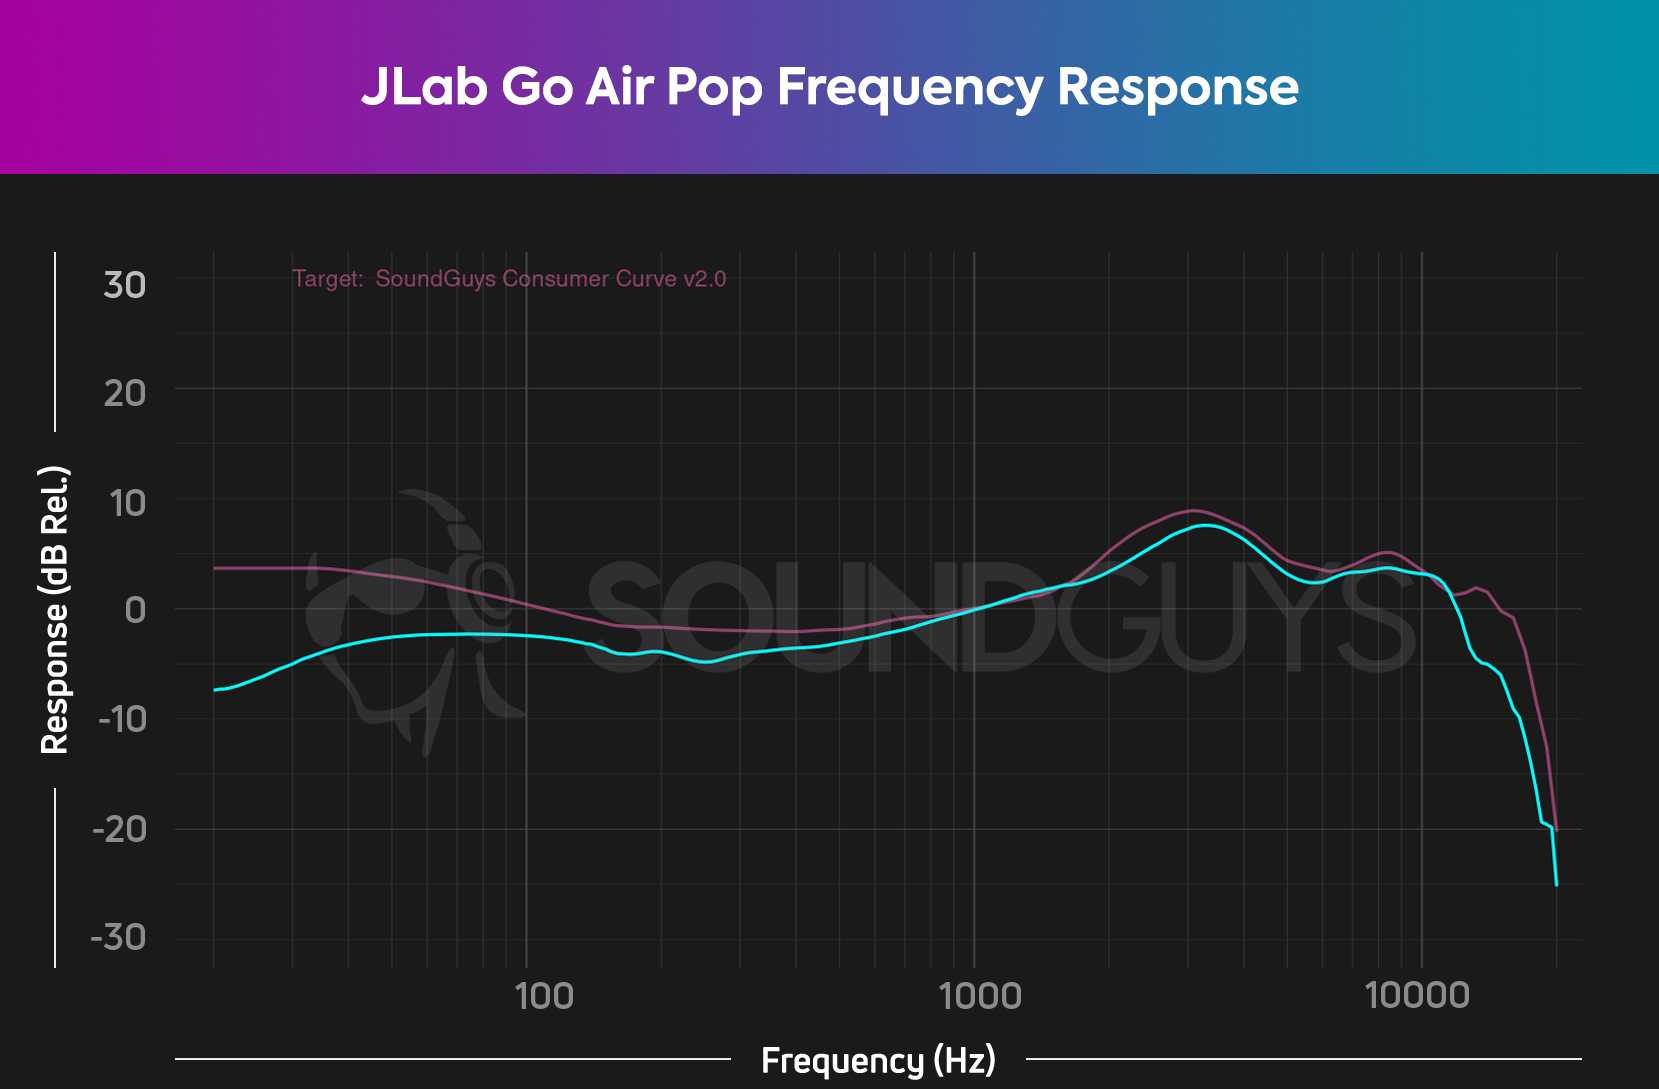 The frequency response chart for the JLab GO Air POP.